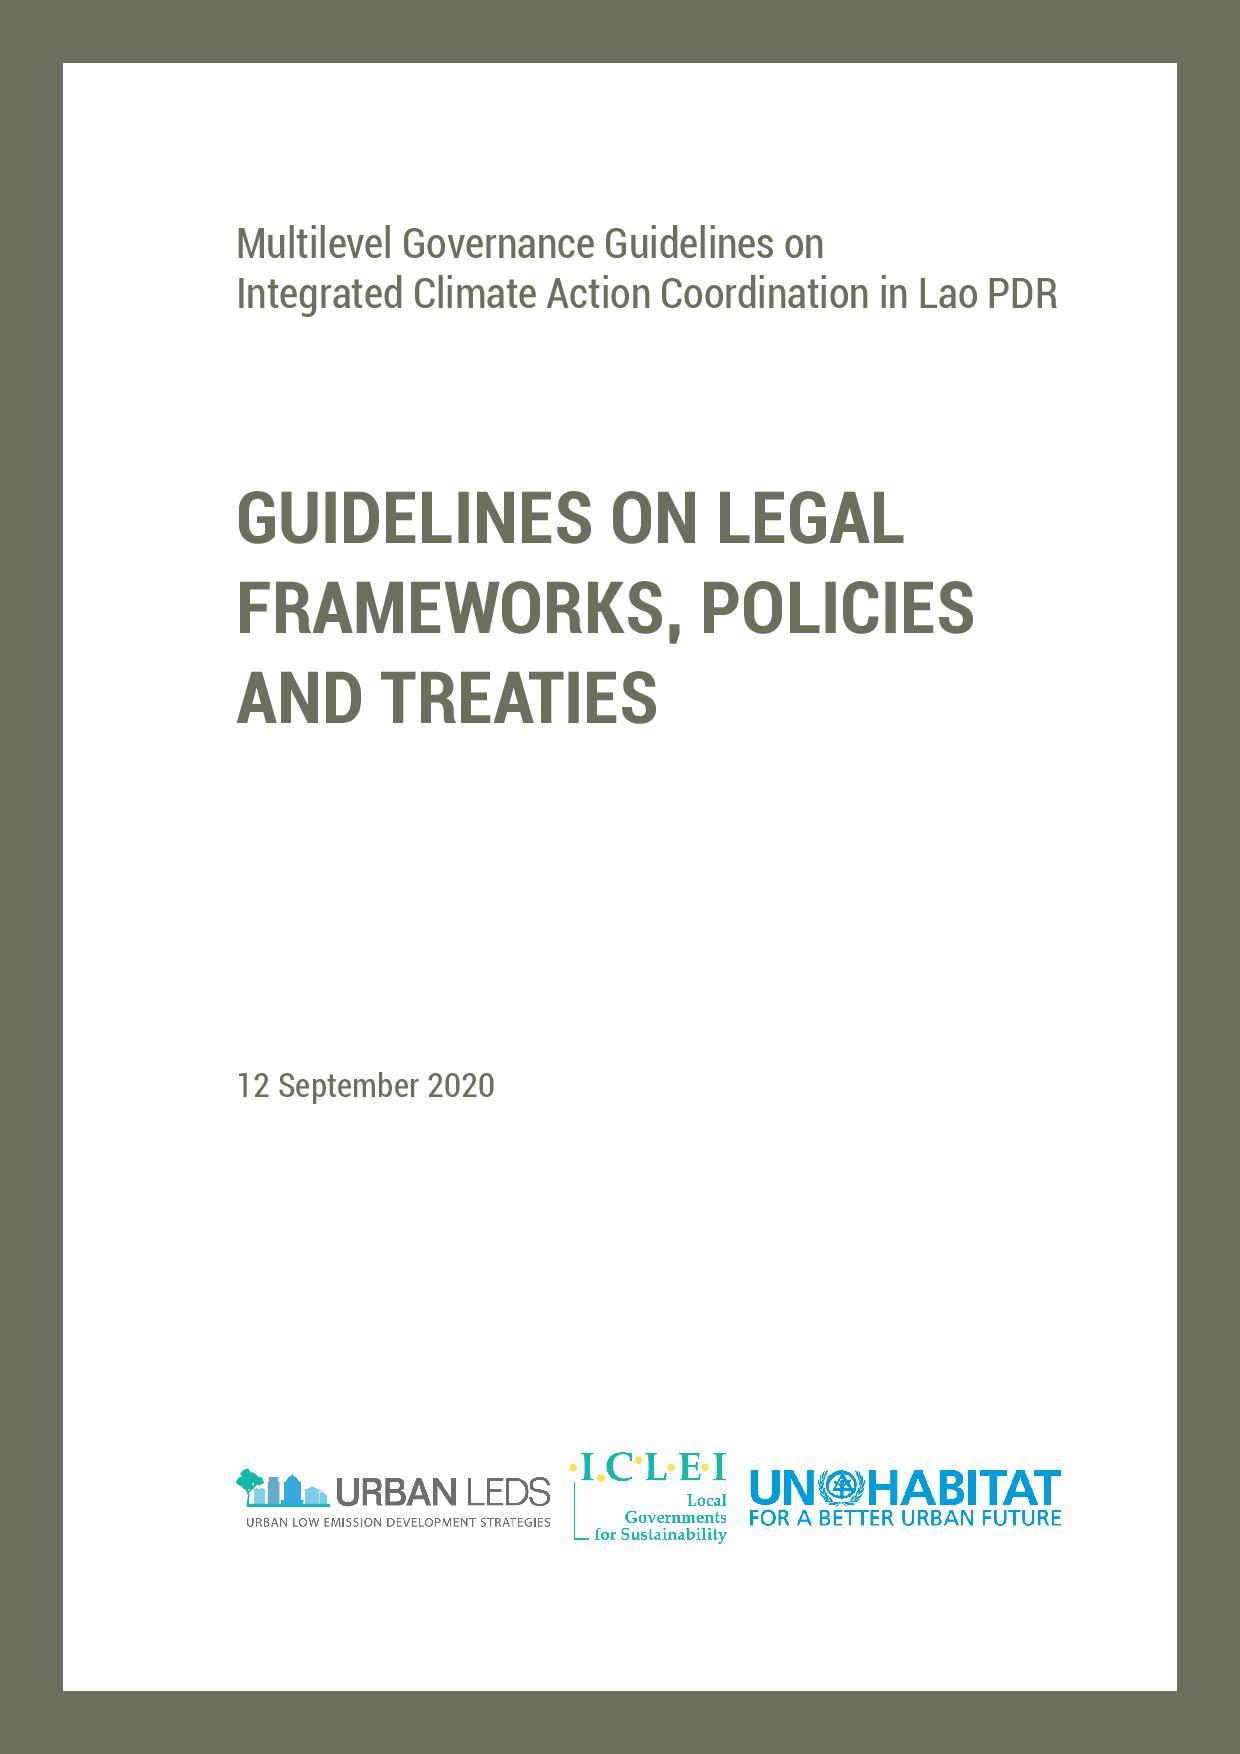 Lao PDR: Guidelines on Legal Frameworks, Policies and Treaties